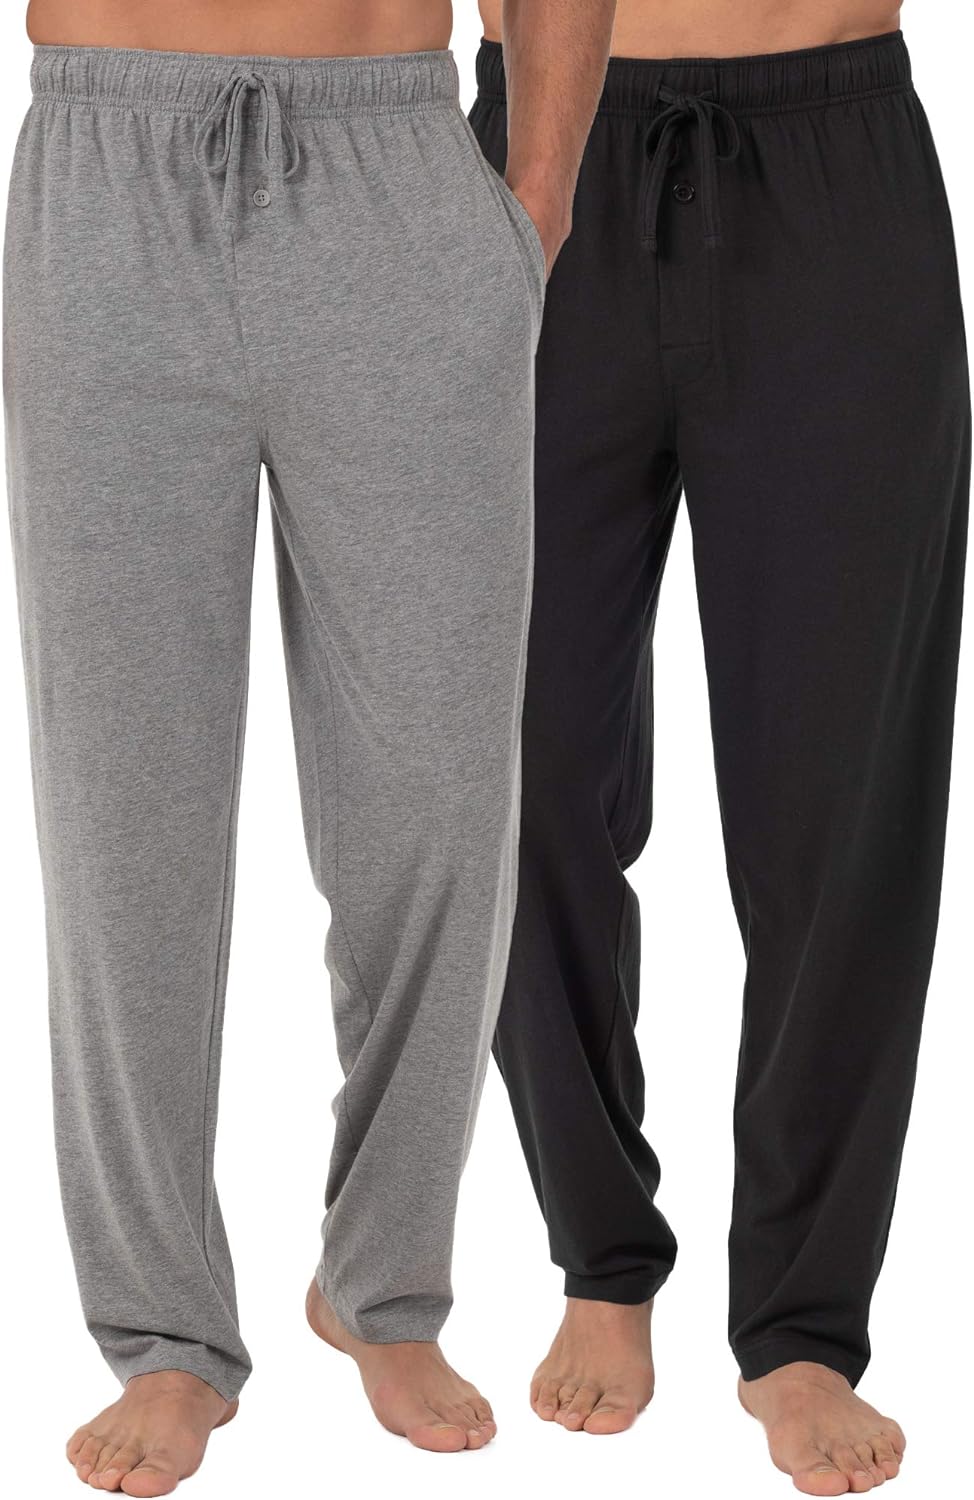 Fruit of the Loom Men' Extended Sizes Jersey Knit Sleep Pajama Lounge Pant (1 & 2 Packs)